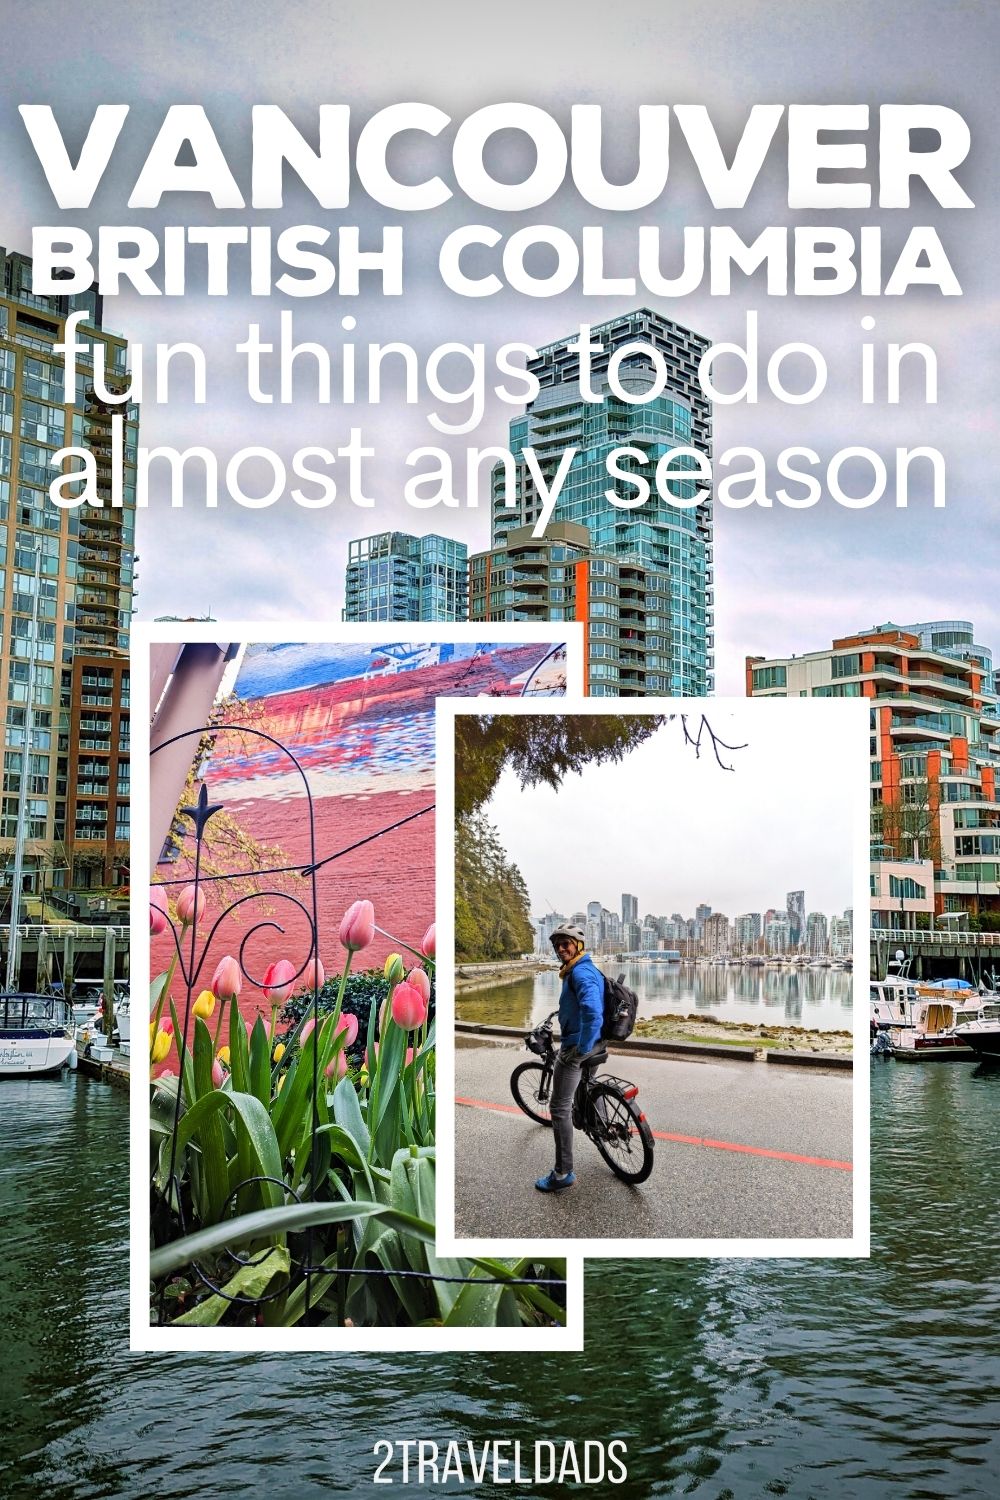 There are countless things to do in Vancouver for a weekend visit, but I've sorted through our many trips to pick our favorites. From First Nations art and biking to things to do just outside of town, this weekend guide to Vancouver is ideal for planning an easy trip.